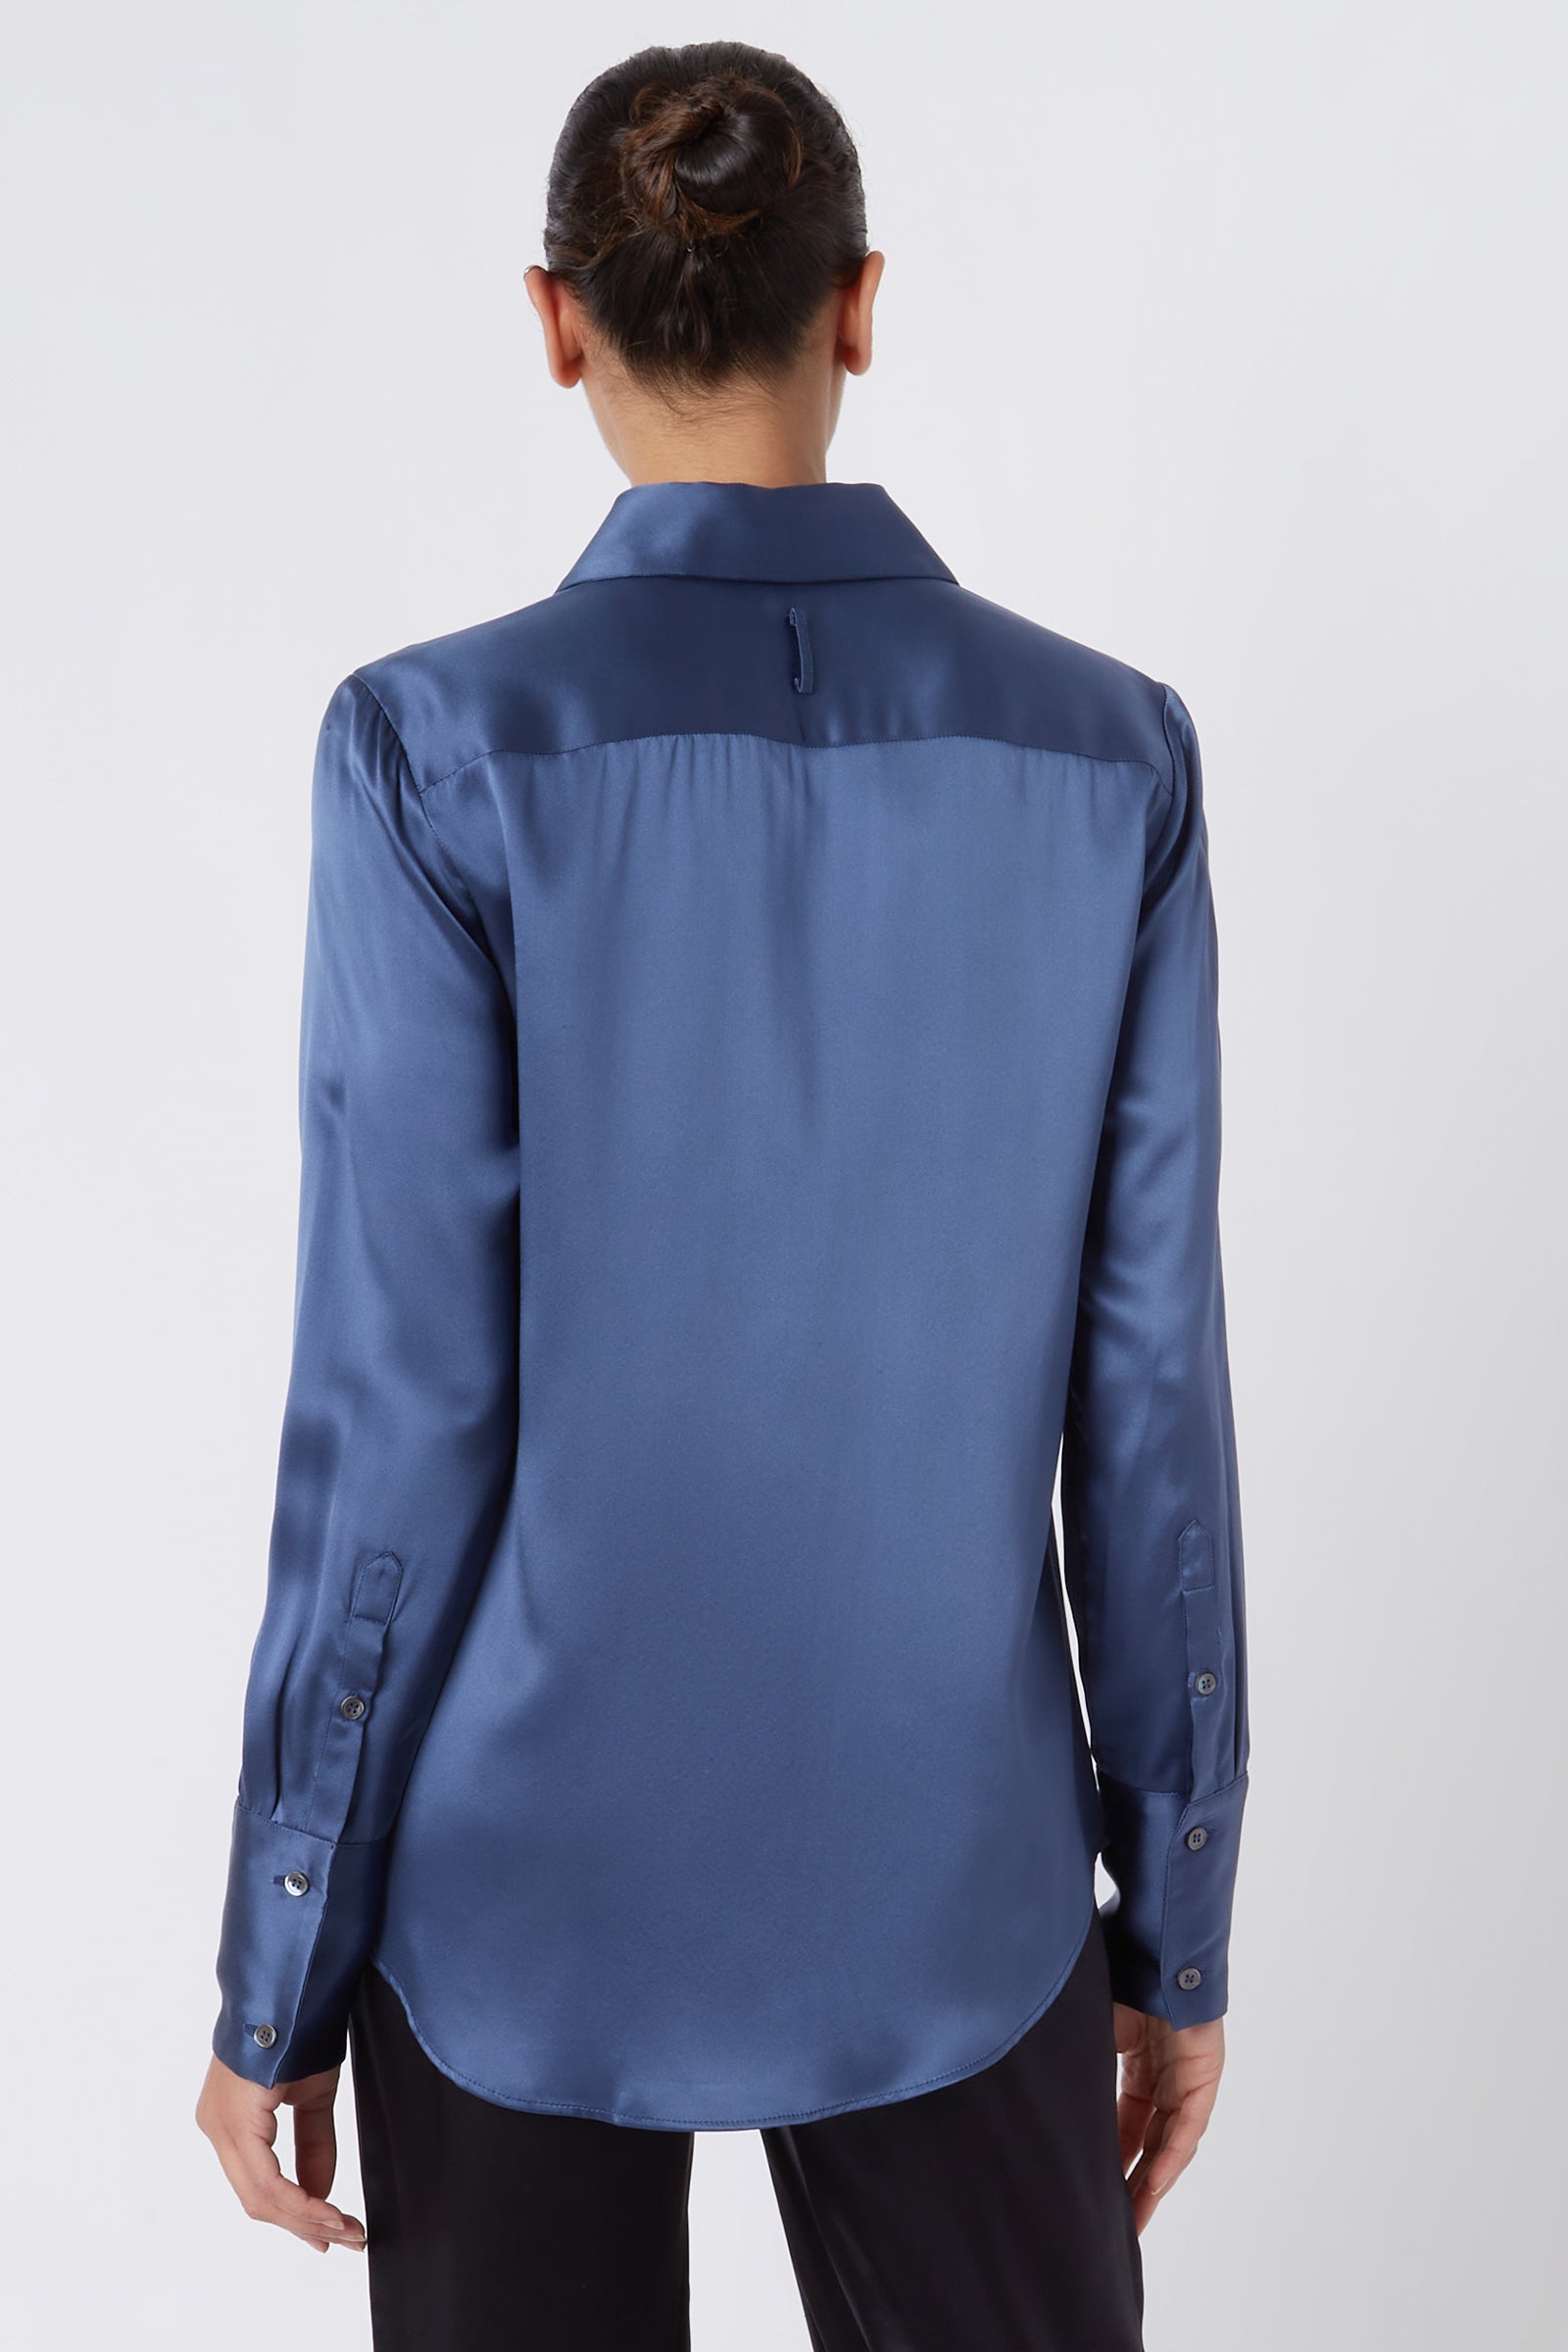 Kal Rieman Classic Tailored Blouse in Dusty Blue Silk on Model Looking Right Cropped Front View